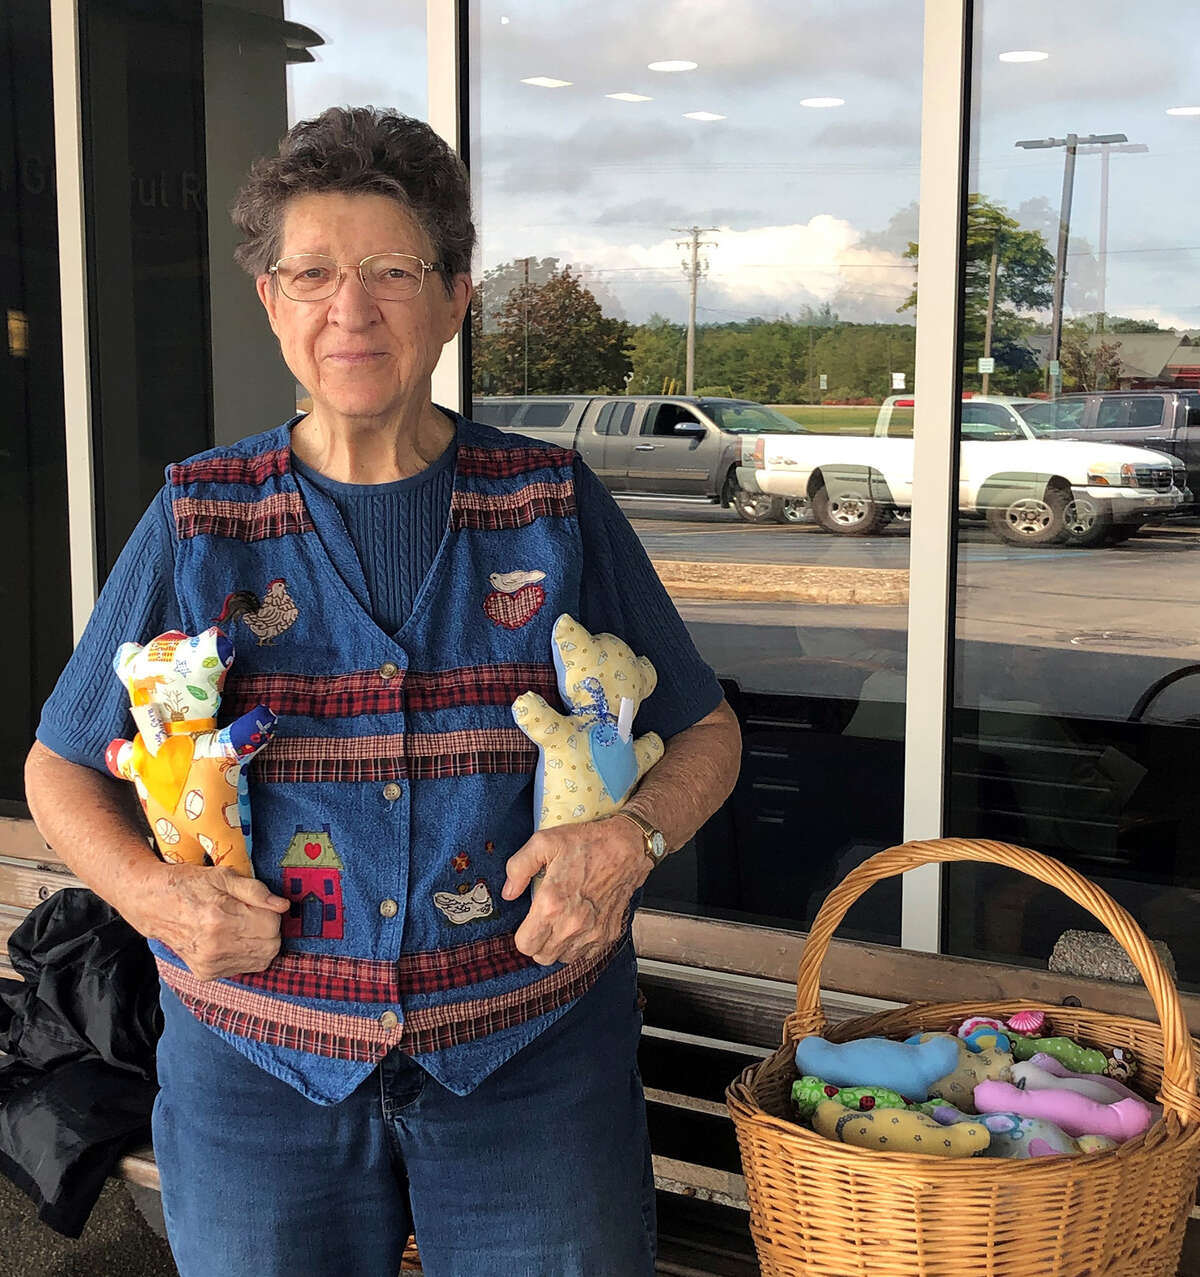 For 12 years, Jean Rouse has been making bears for children receiving care at Munson Healthcare Manistee Hospital.